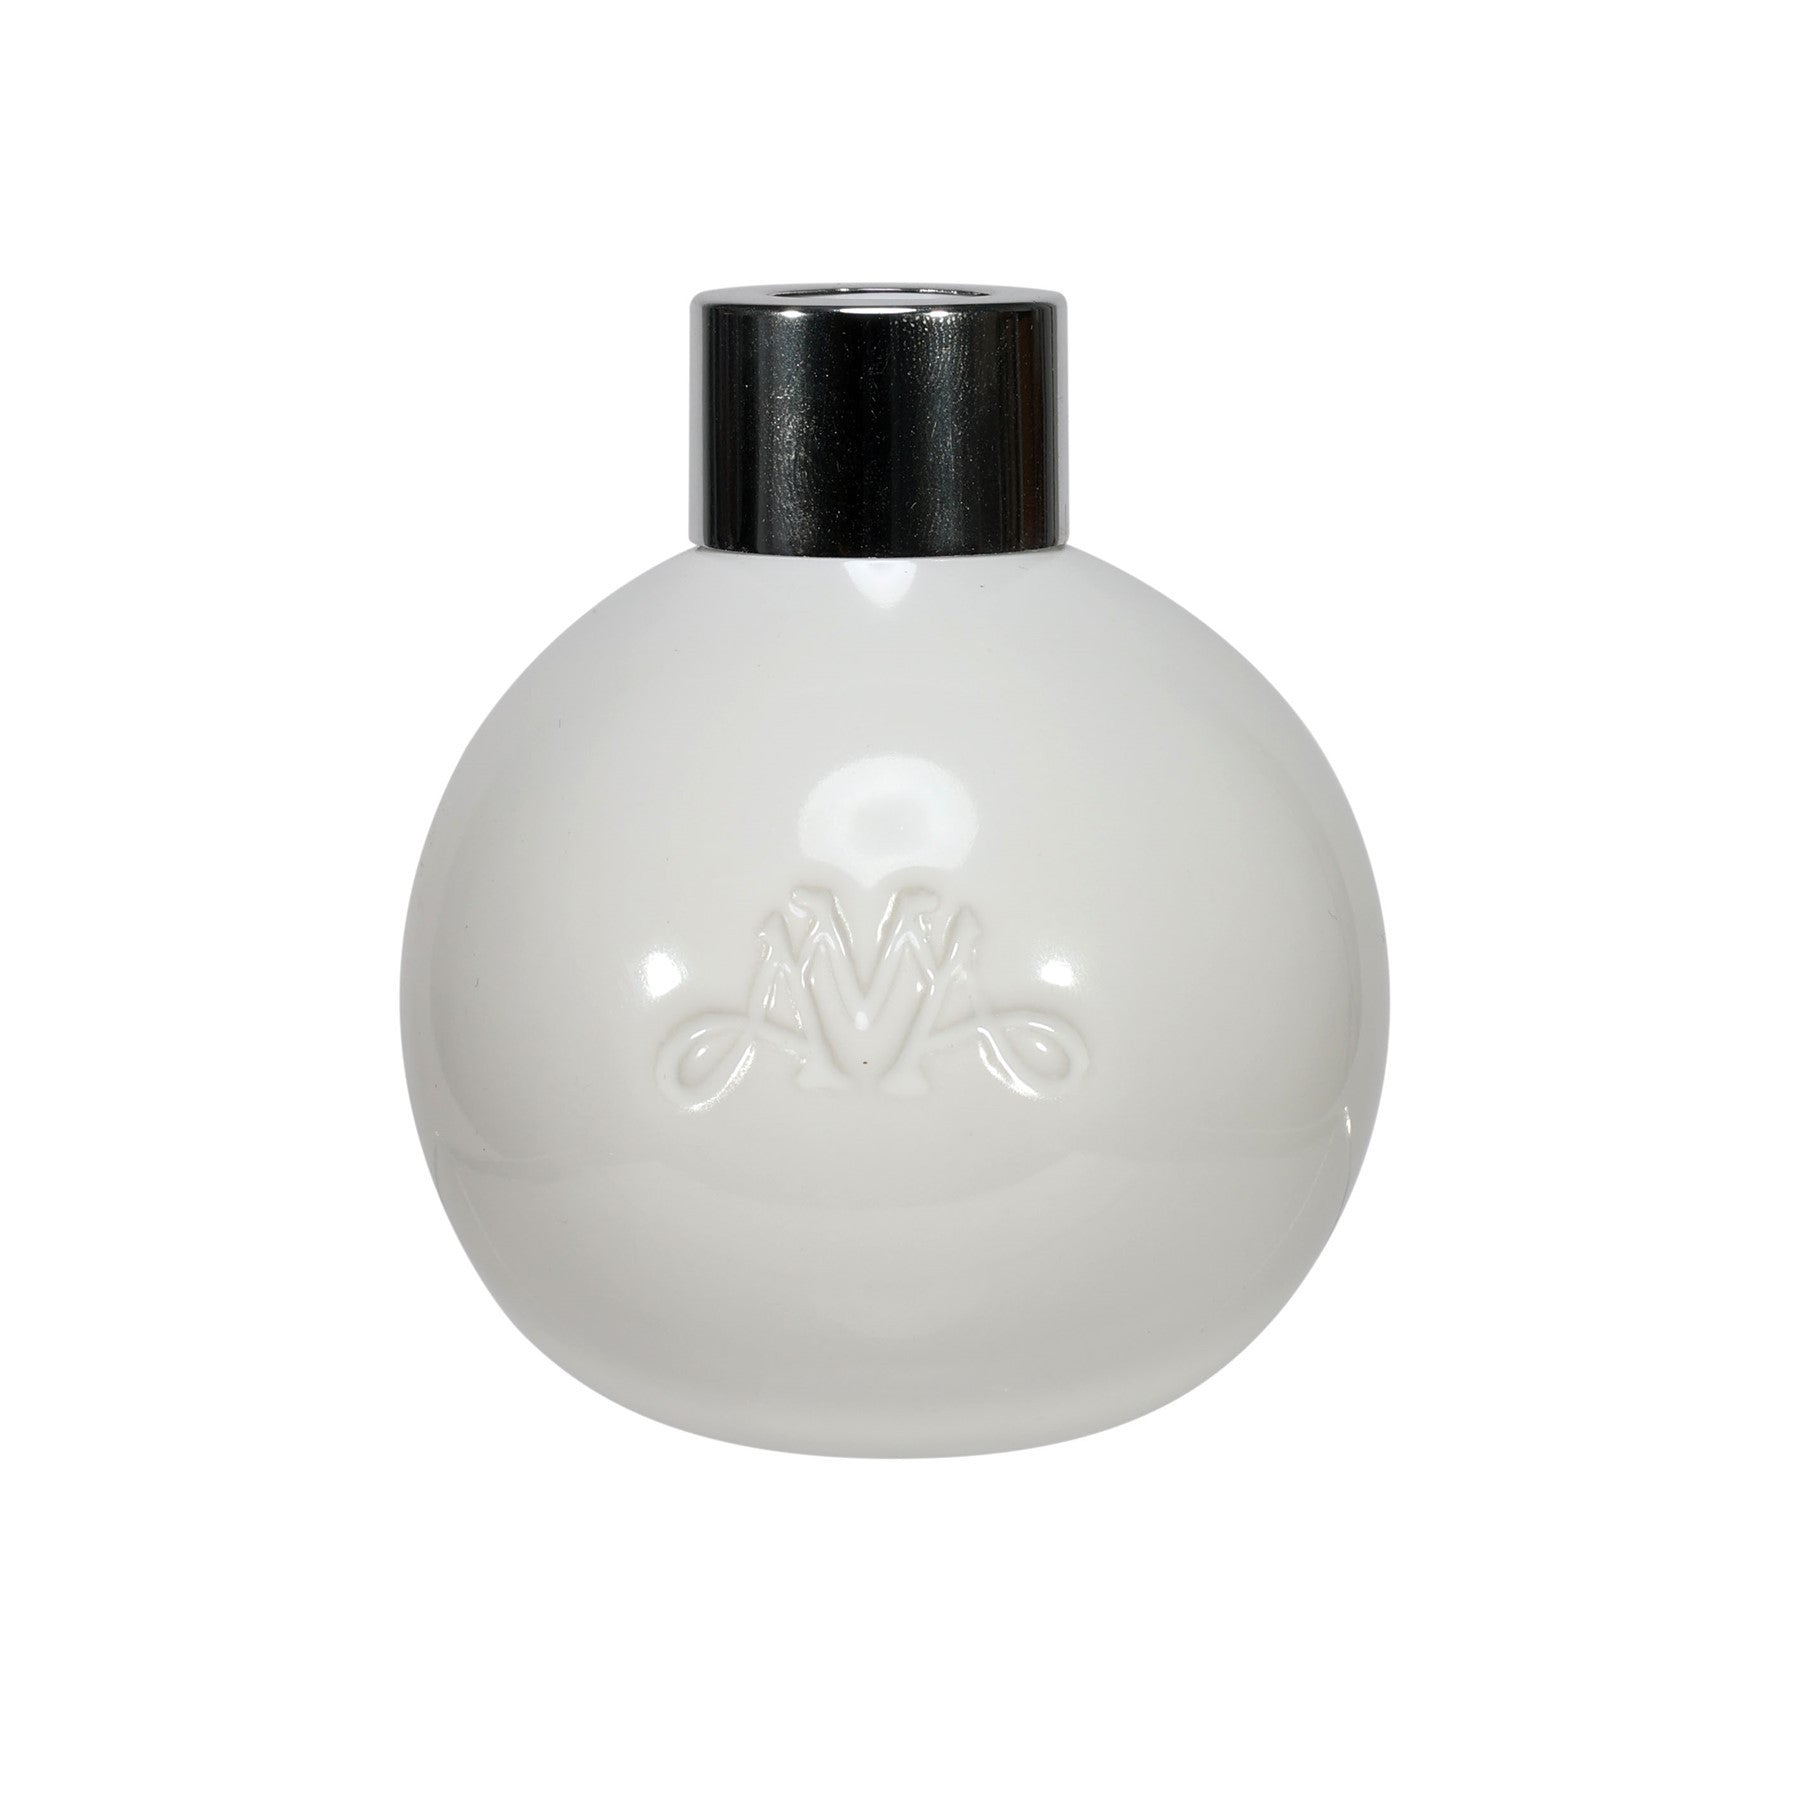 View Ava May White Sphere Diffuser Bottle information